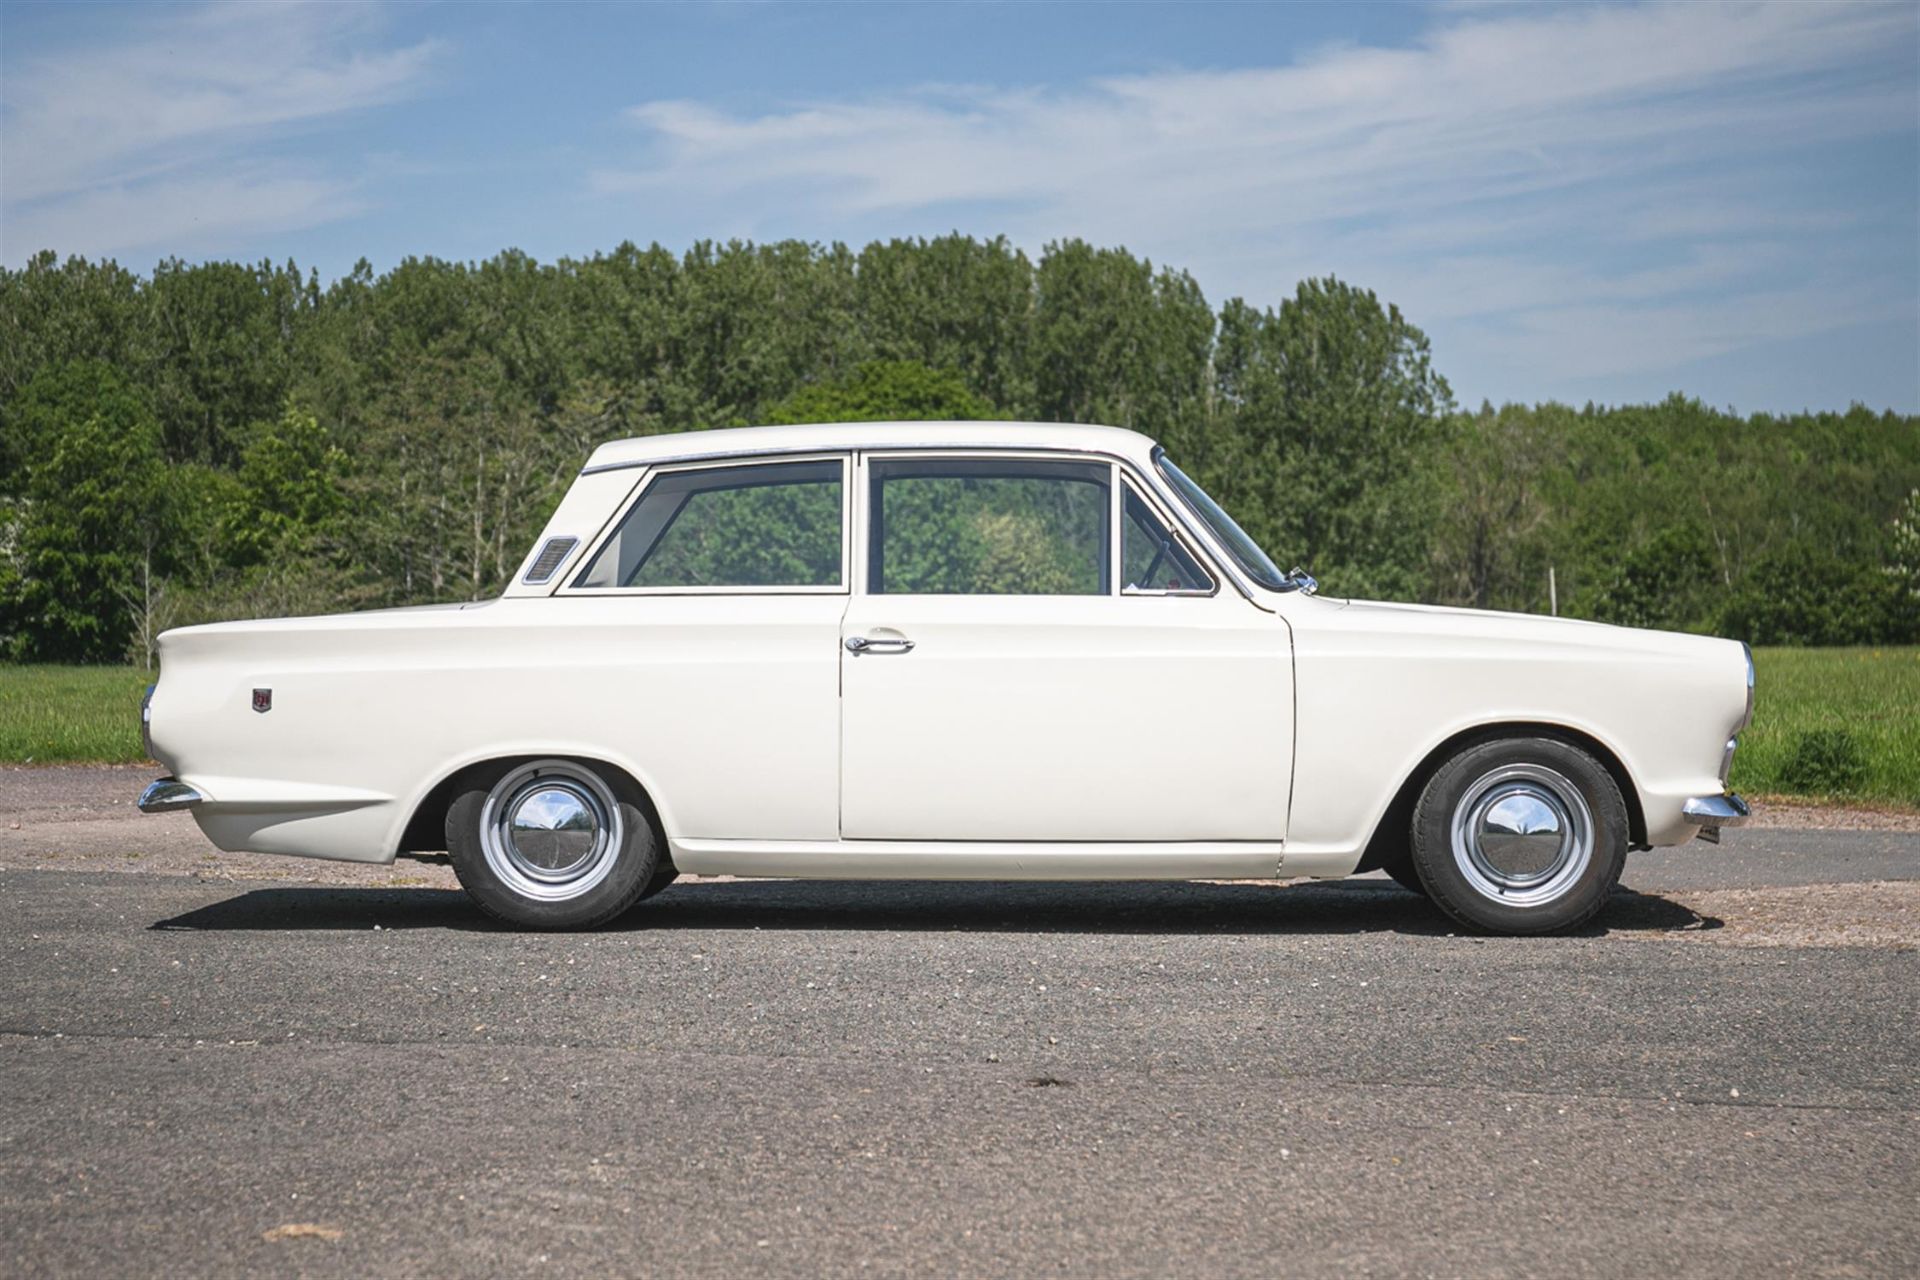 1965 Ford Cortina Mk1 1500 GT - Image 3 of 5